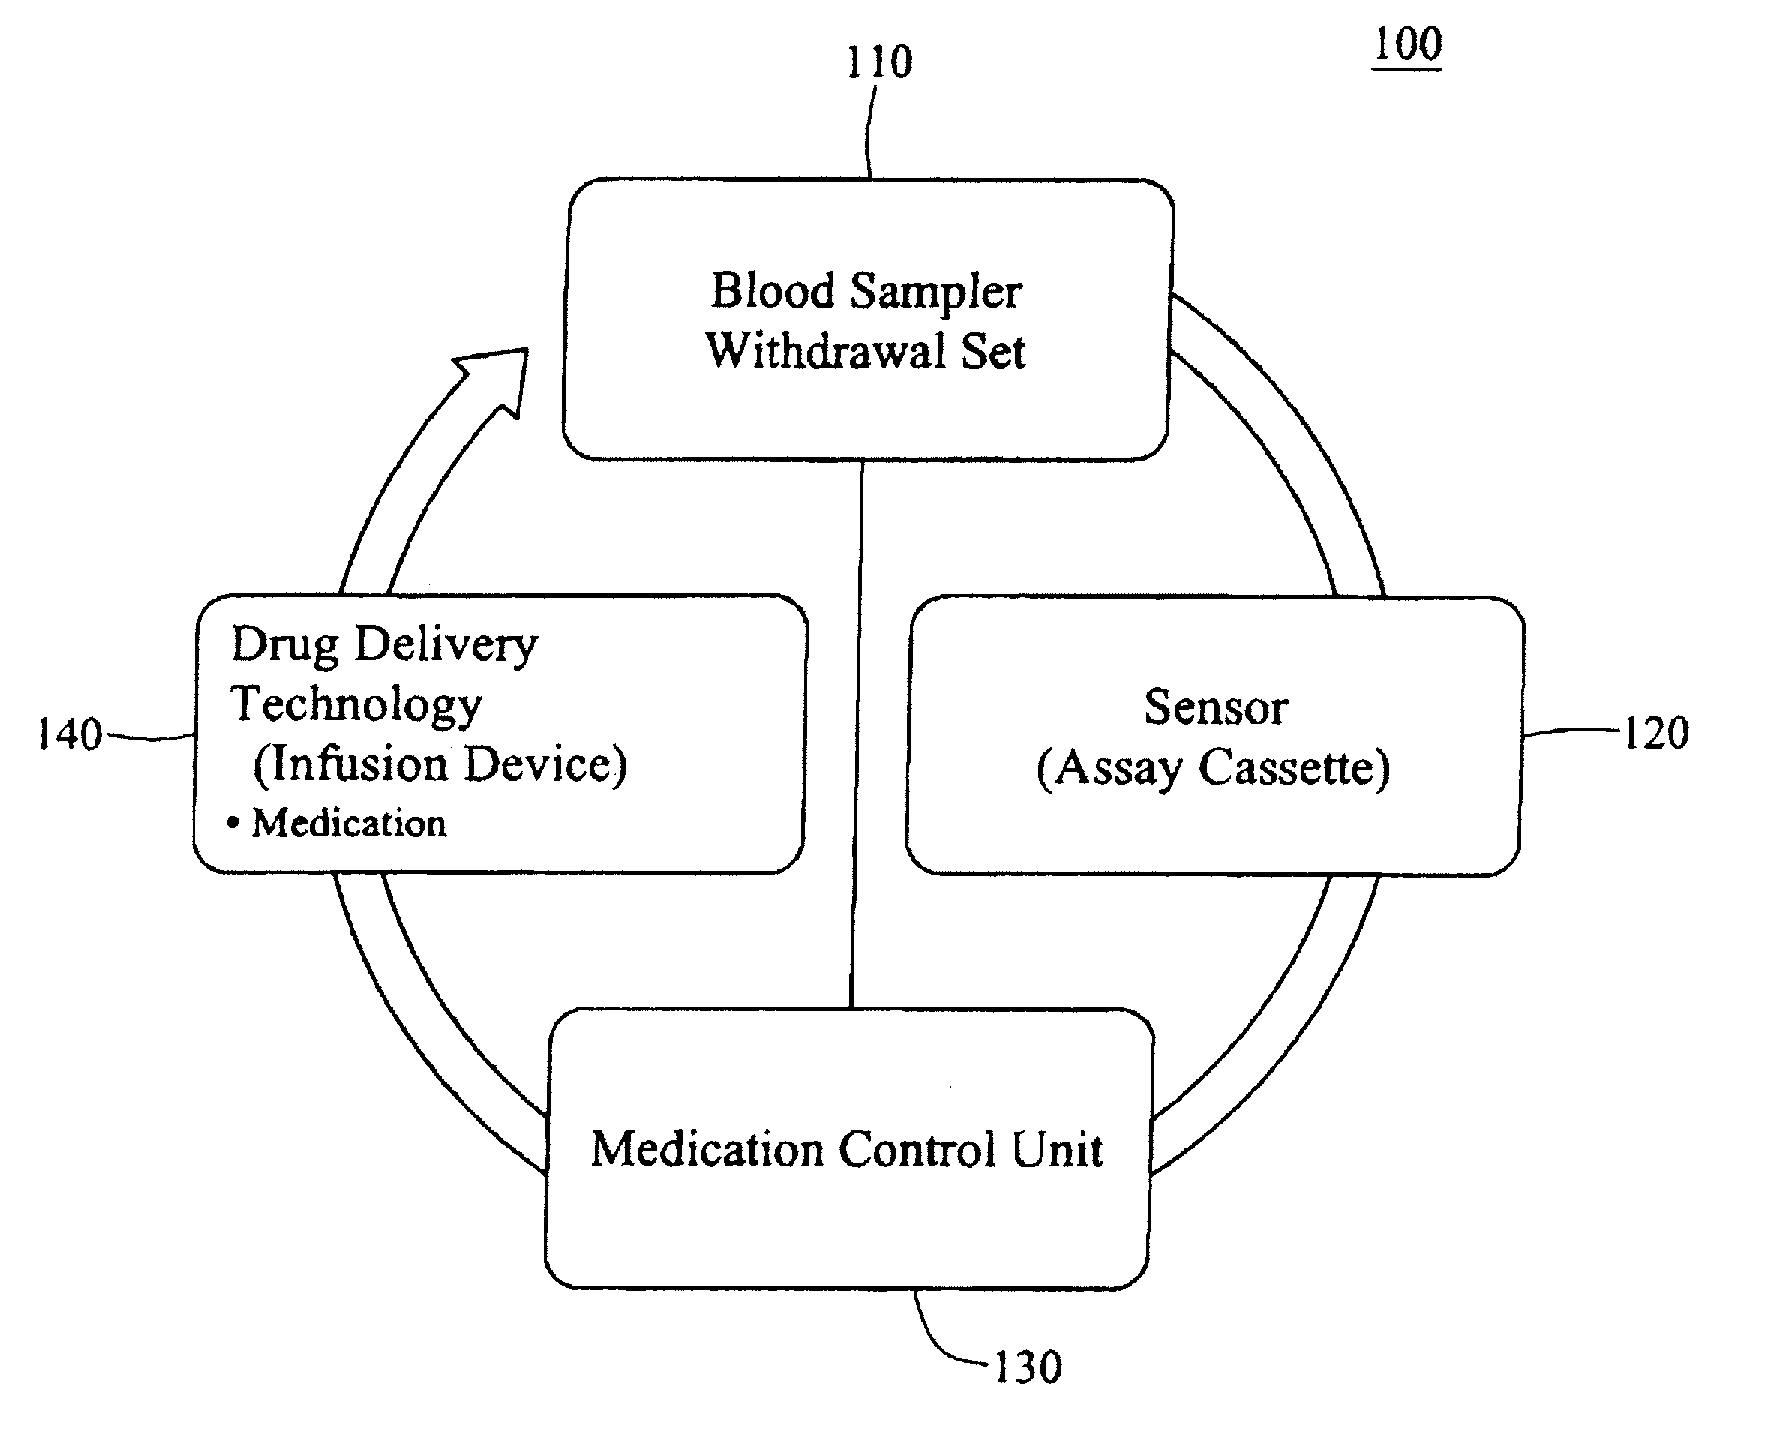 Integrated patient management and control system for medication delivery